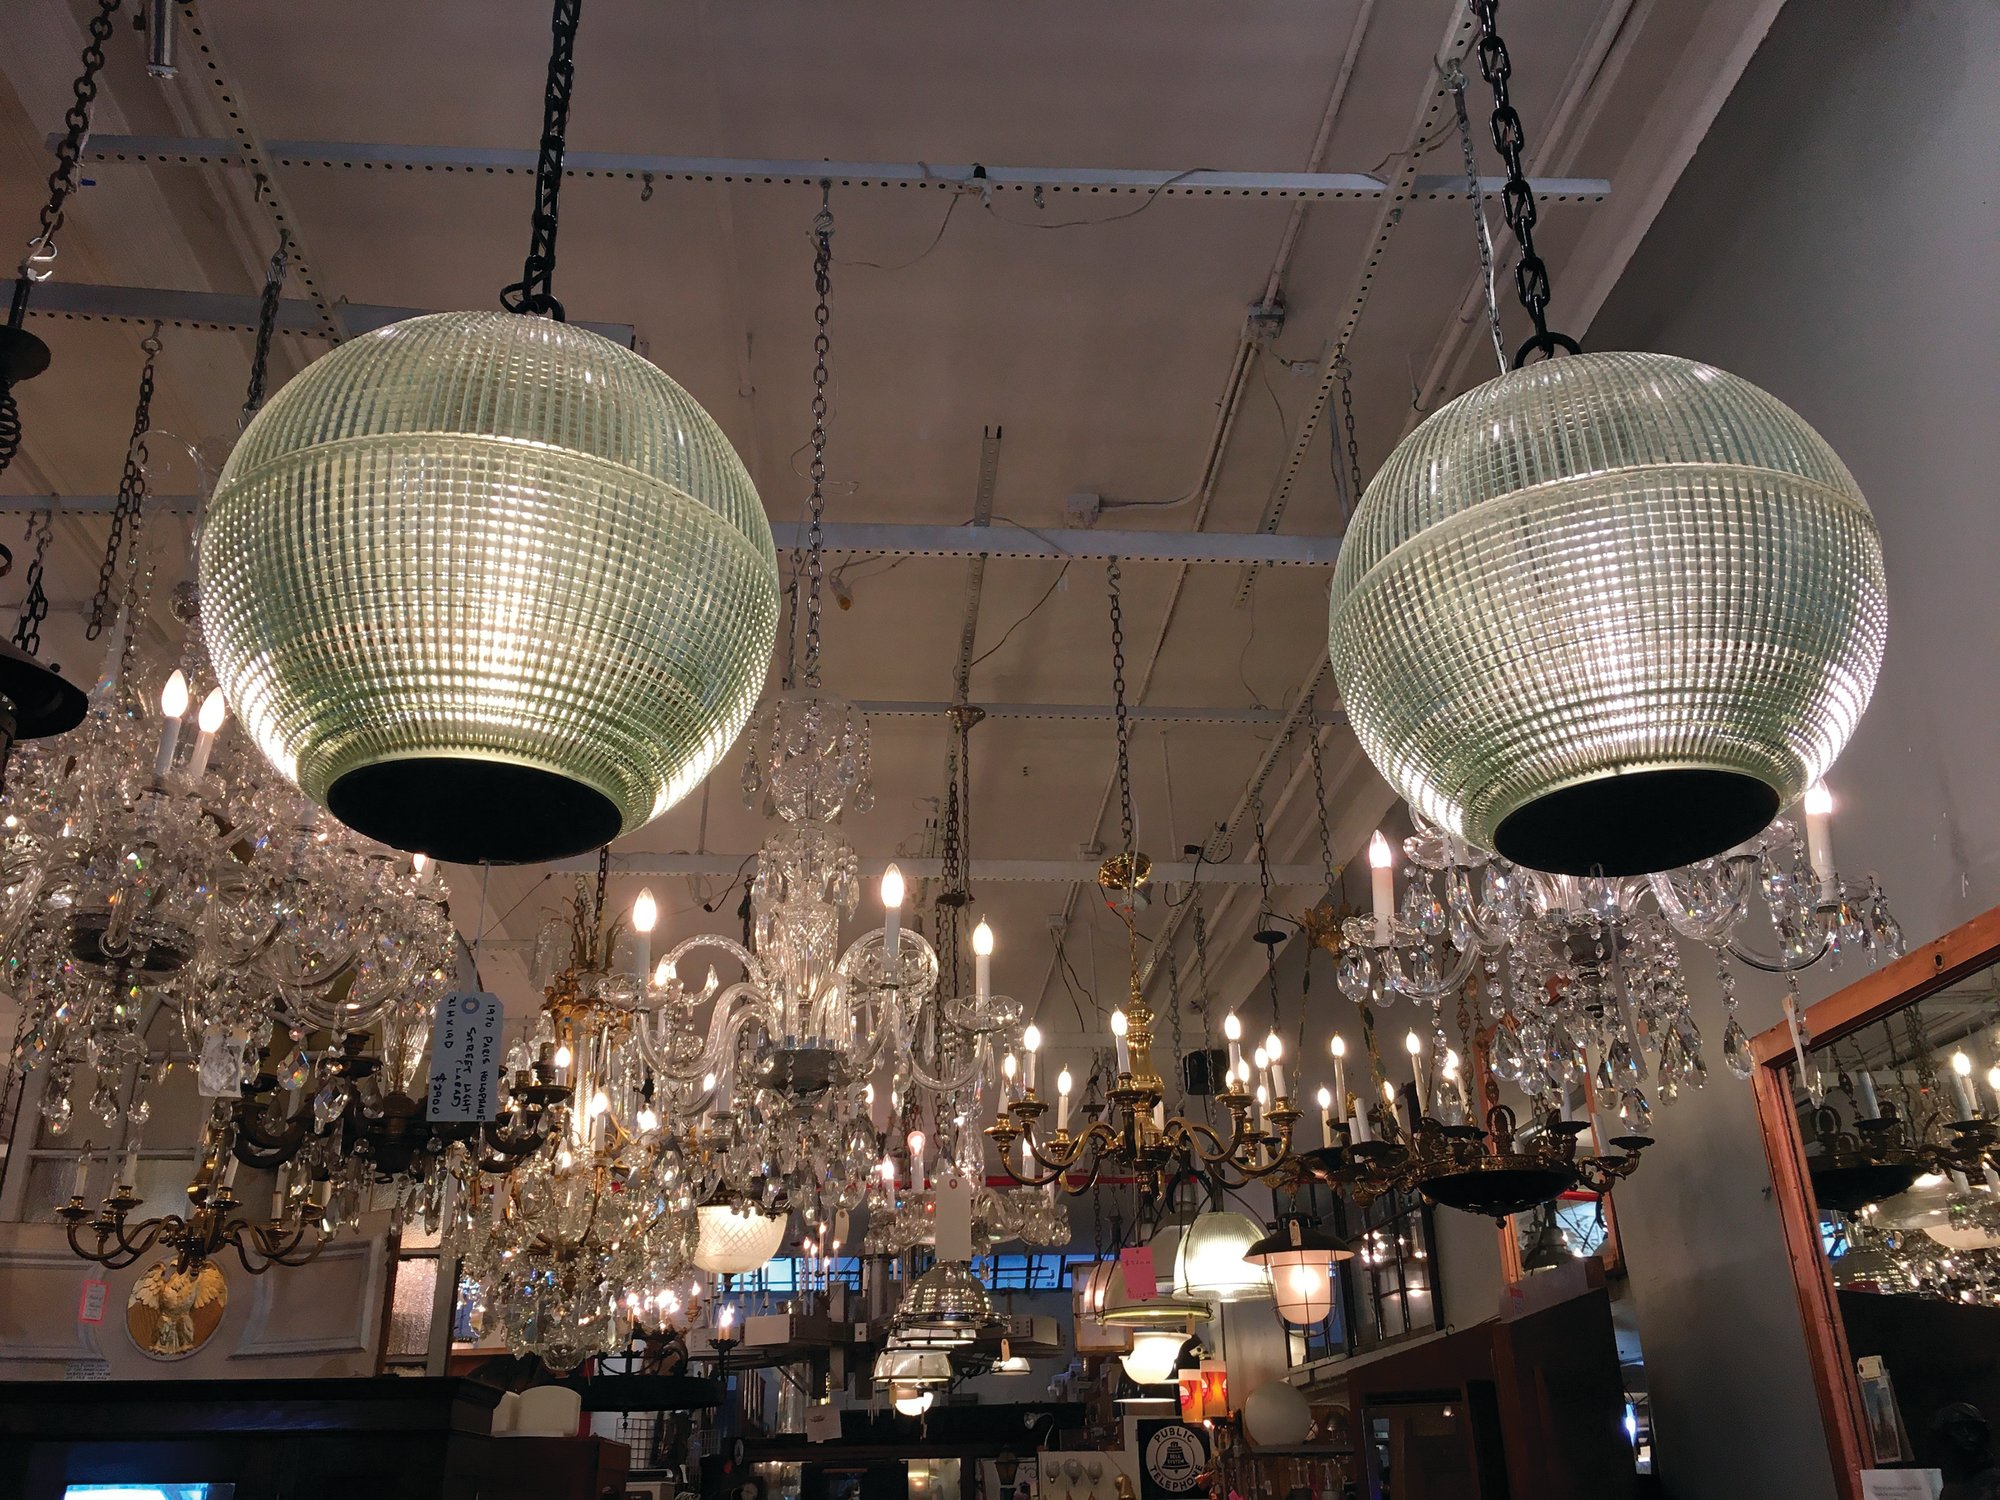 Seen are two light fixtures reconfigured as pendant lamps from Paris street lamps, available for sale at Olde Good Things salvage store in New York.